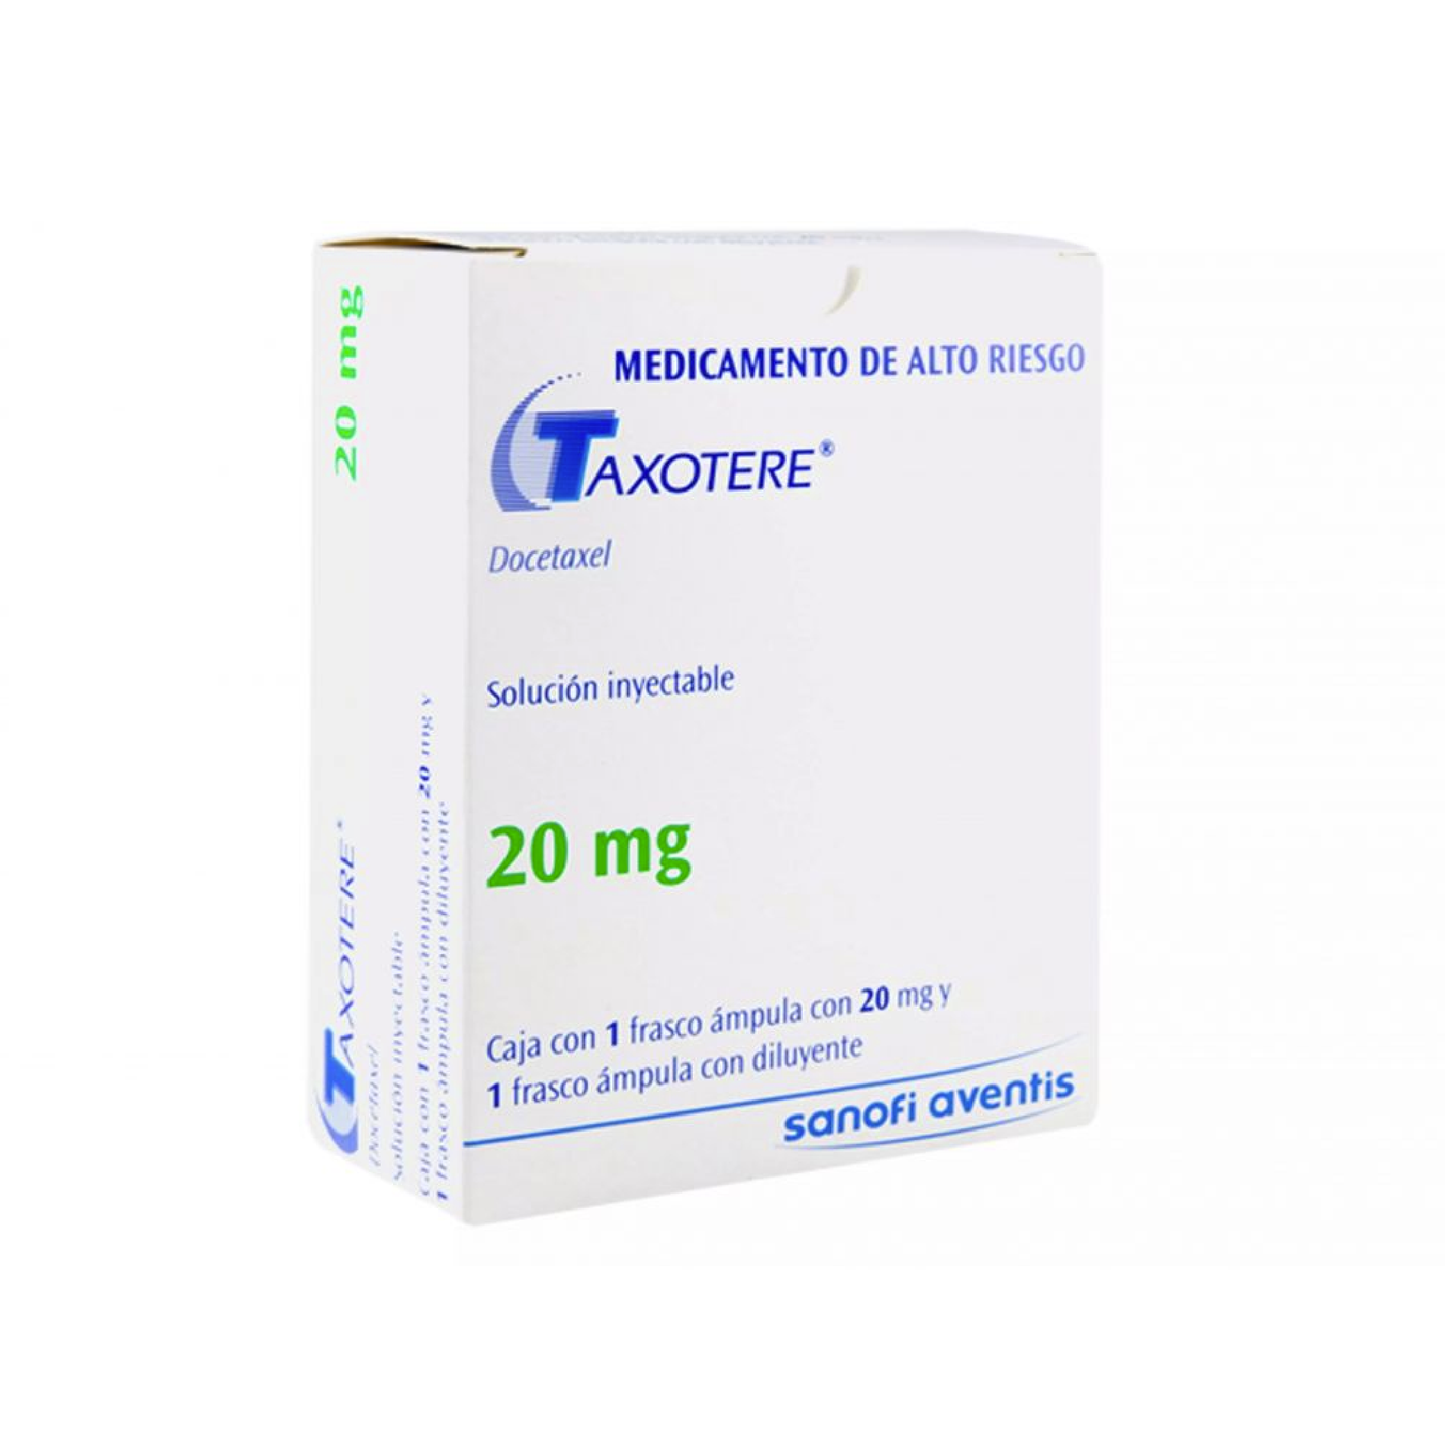 Taxotere (Docetaxel) Sol iny 20 mg Cja c 1 fco amp 20mg